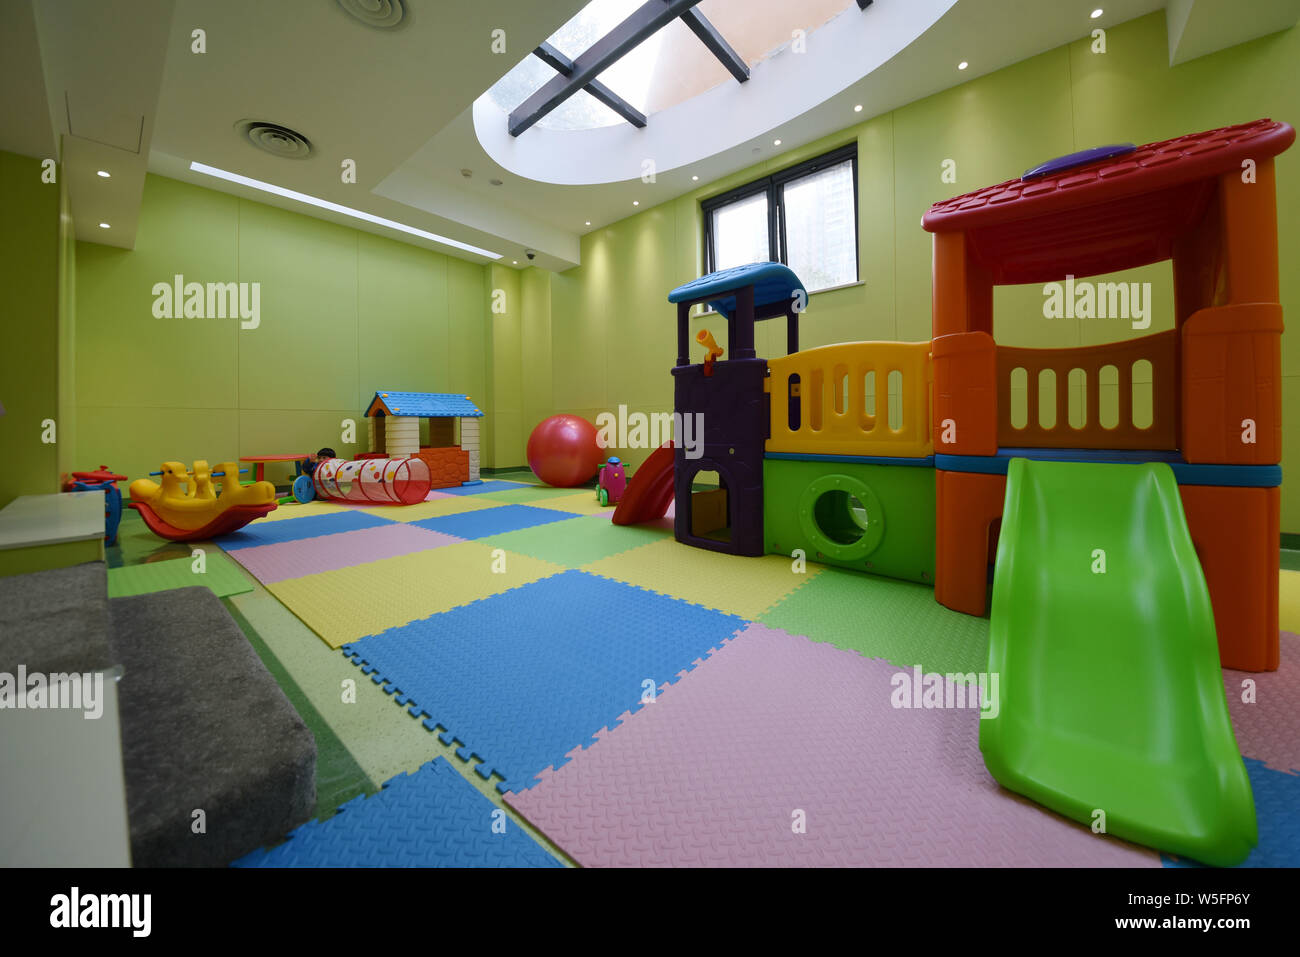 A View Of The Play Area Inside The Castle Shaped Building At The